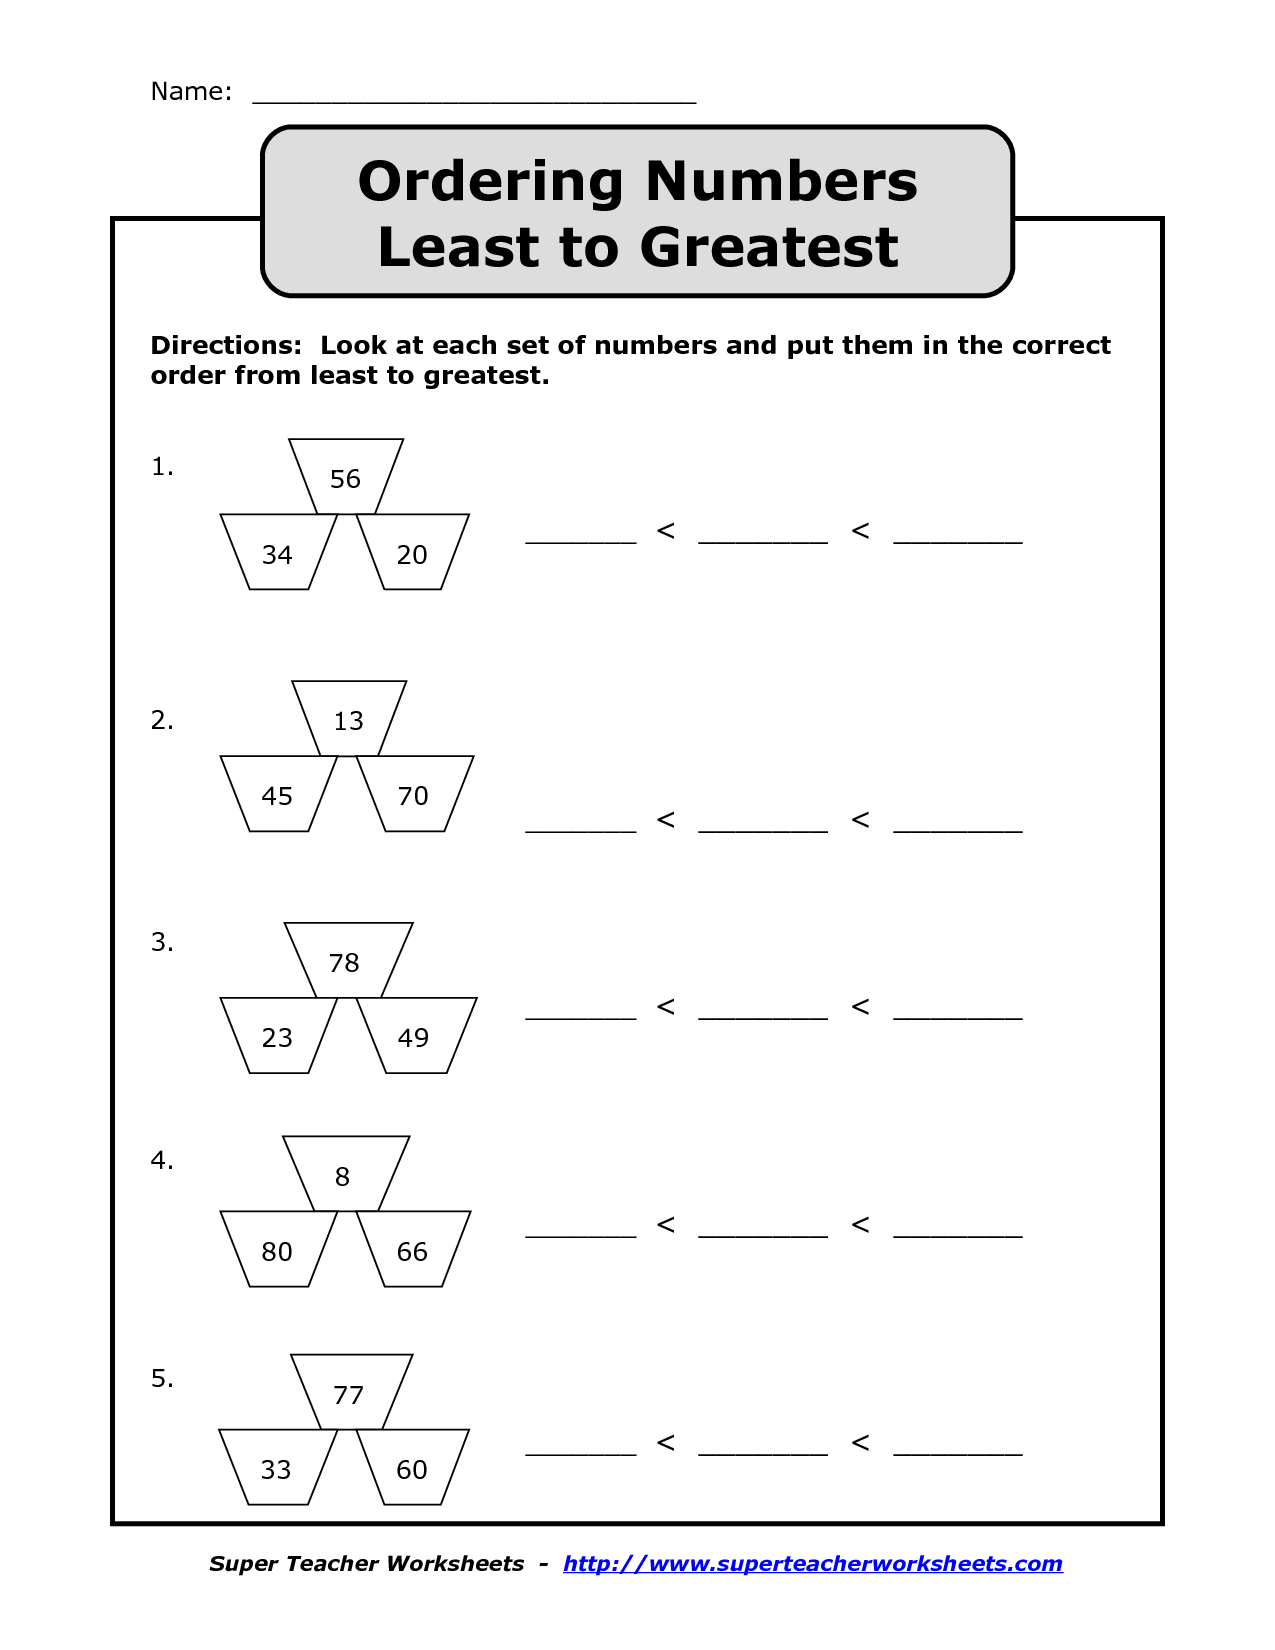 Putting Numbers In Order From Least To Greatest Worksheets